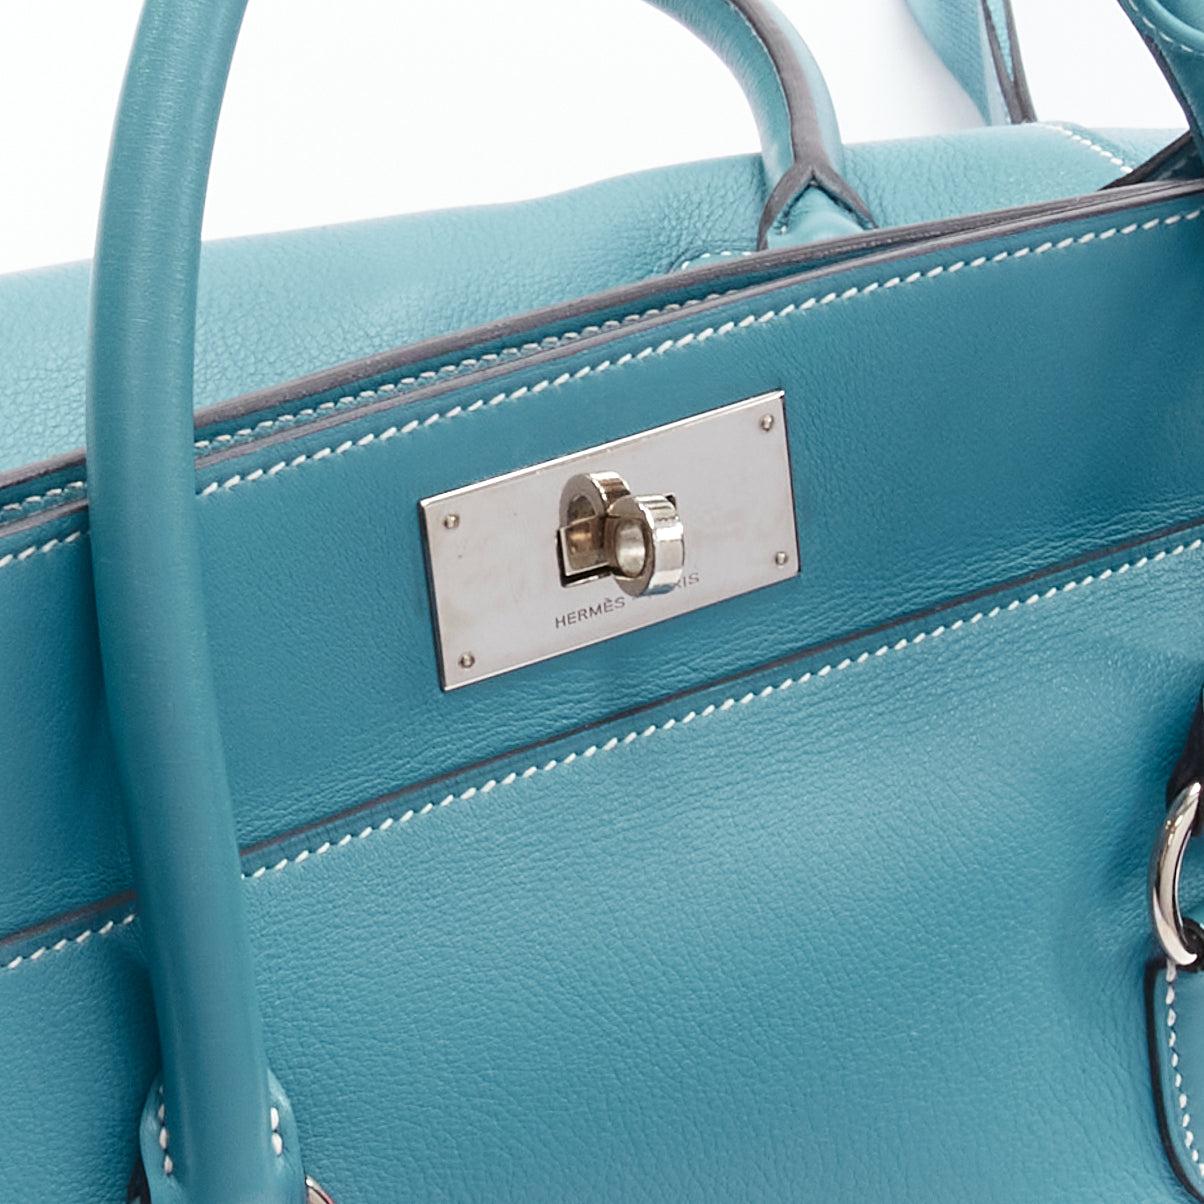 HERMES Toolbox 26 teal blue grained leather SHW top handle satchel 3